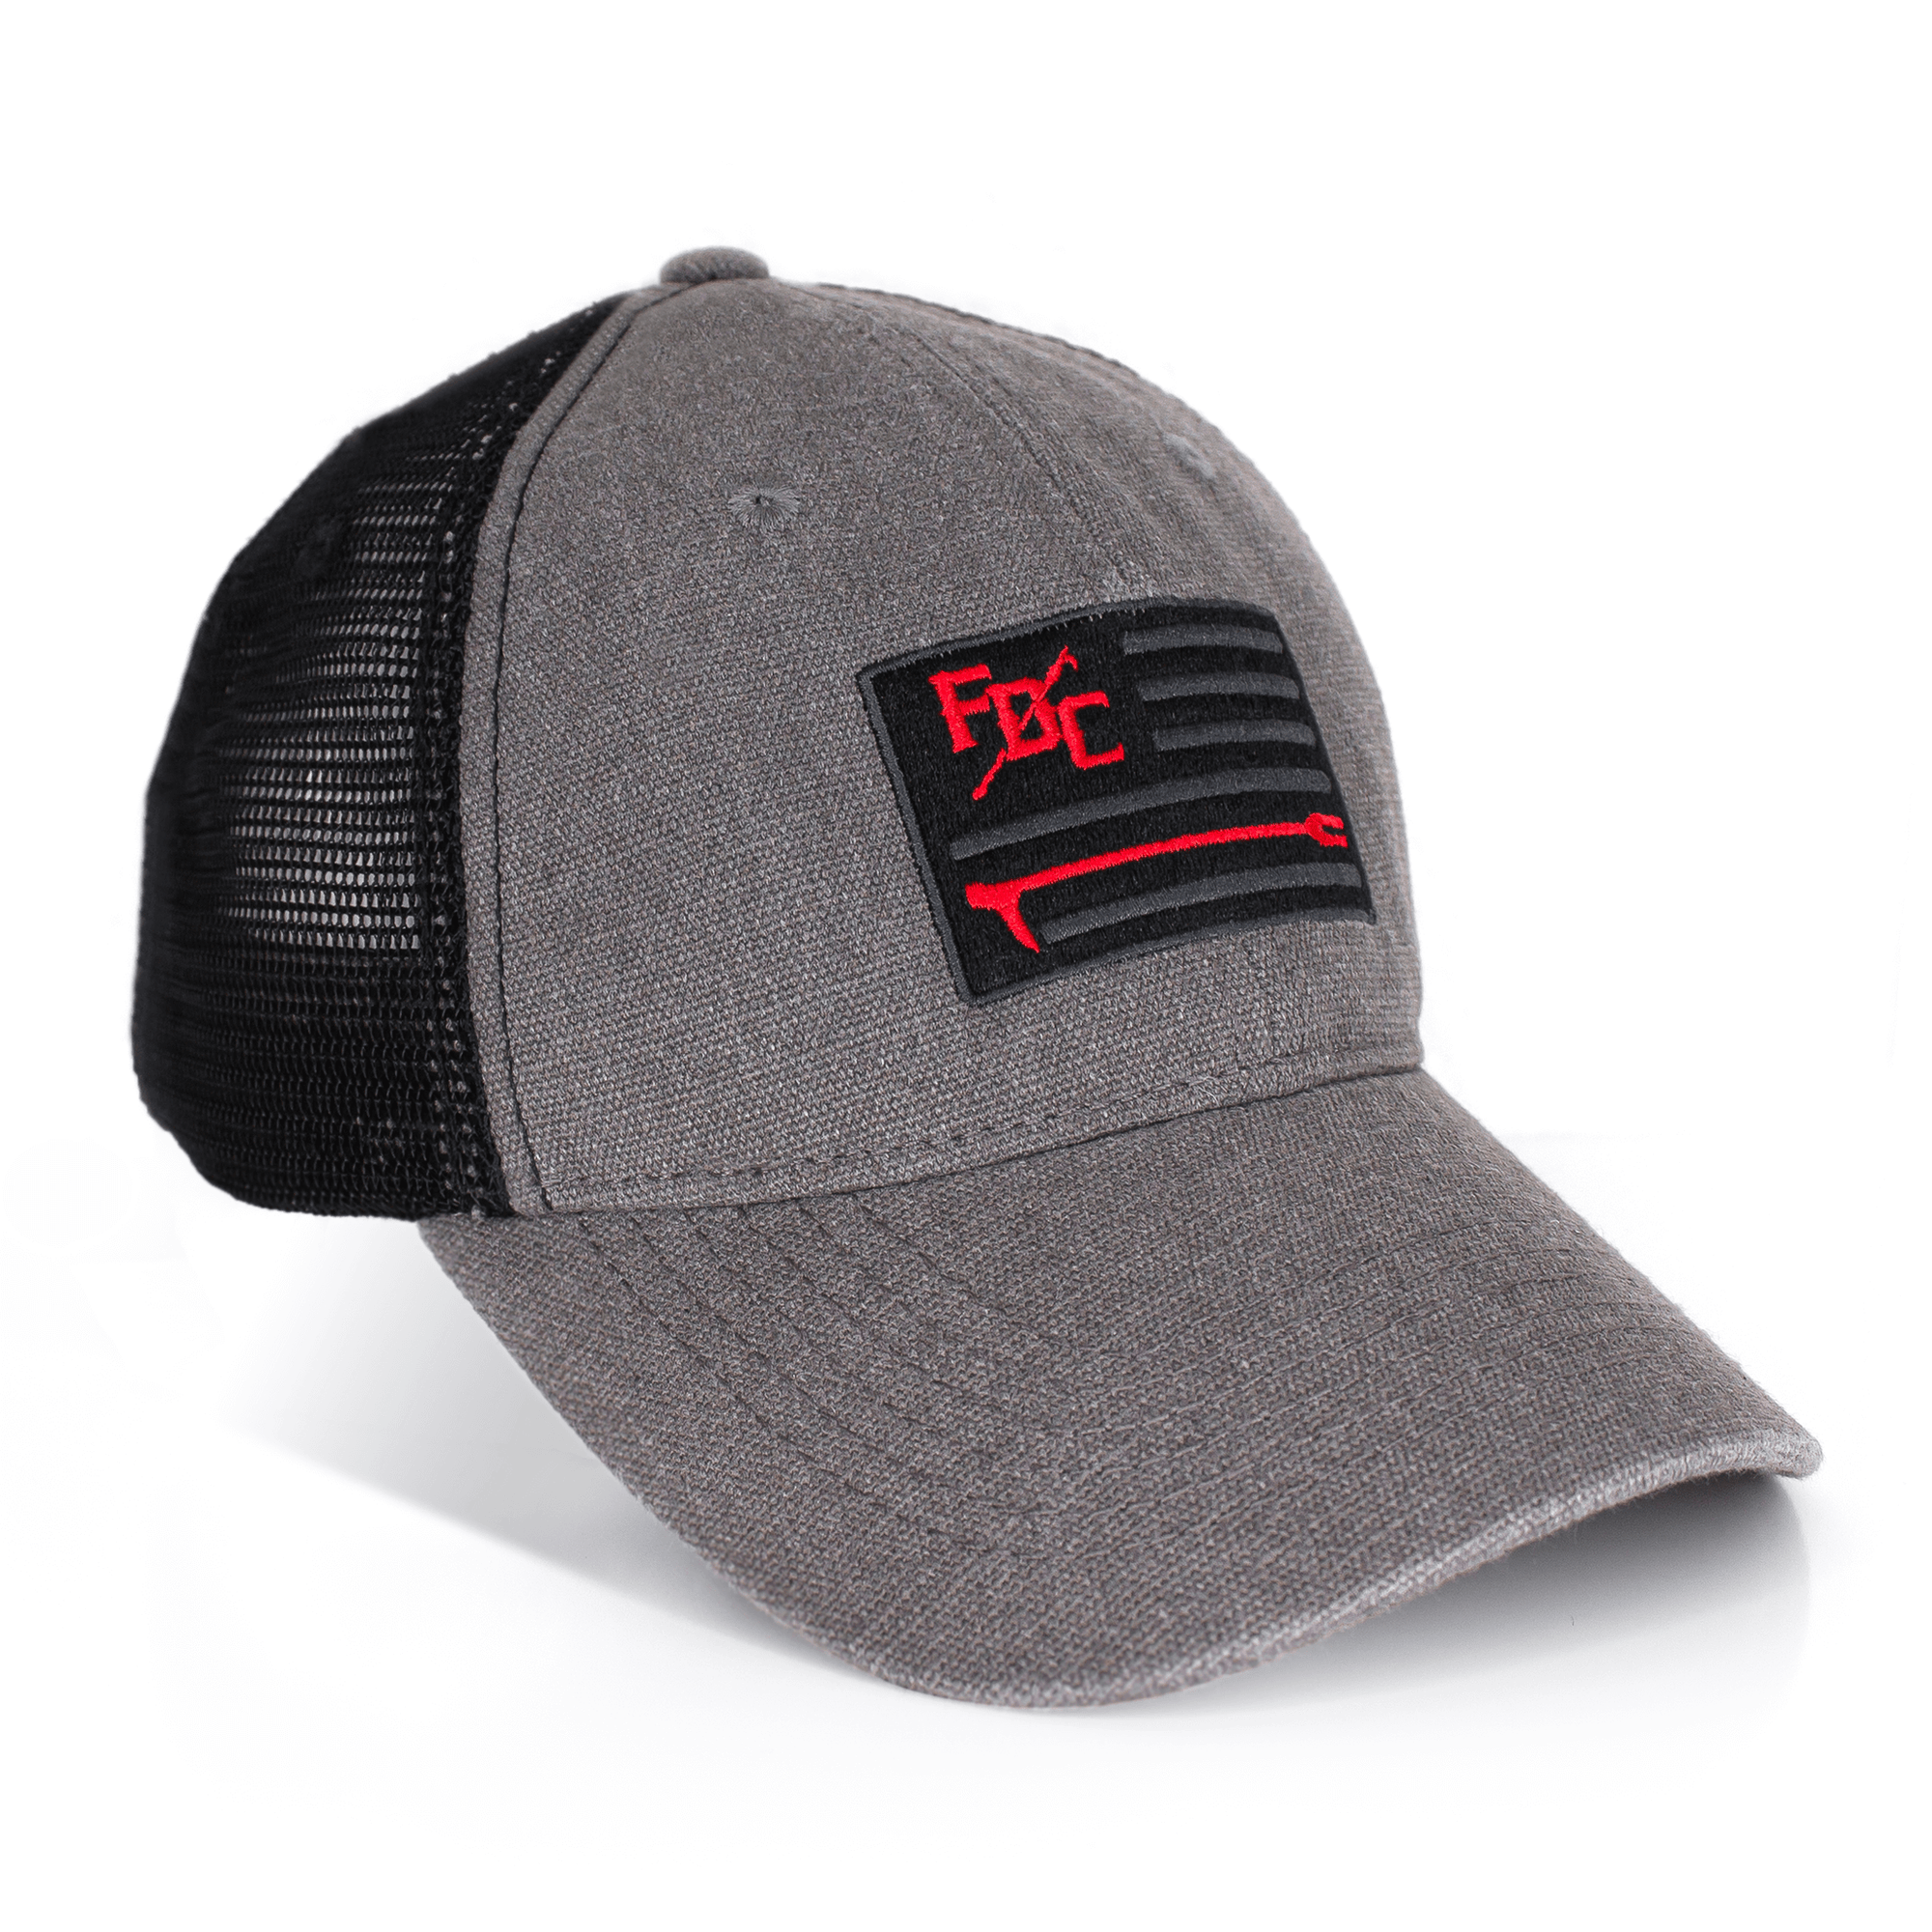 A gray thin red line hat featuring FDC's pike pole logo